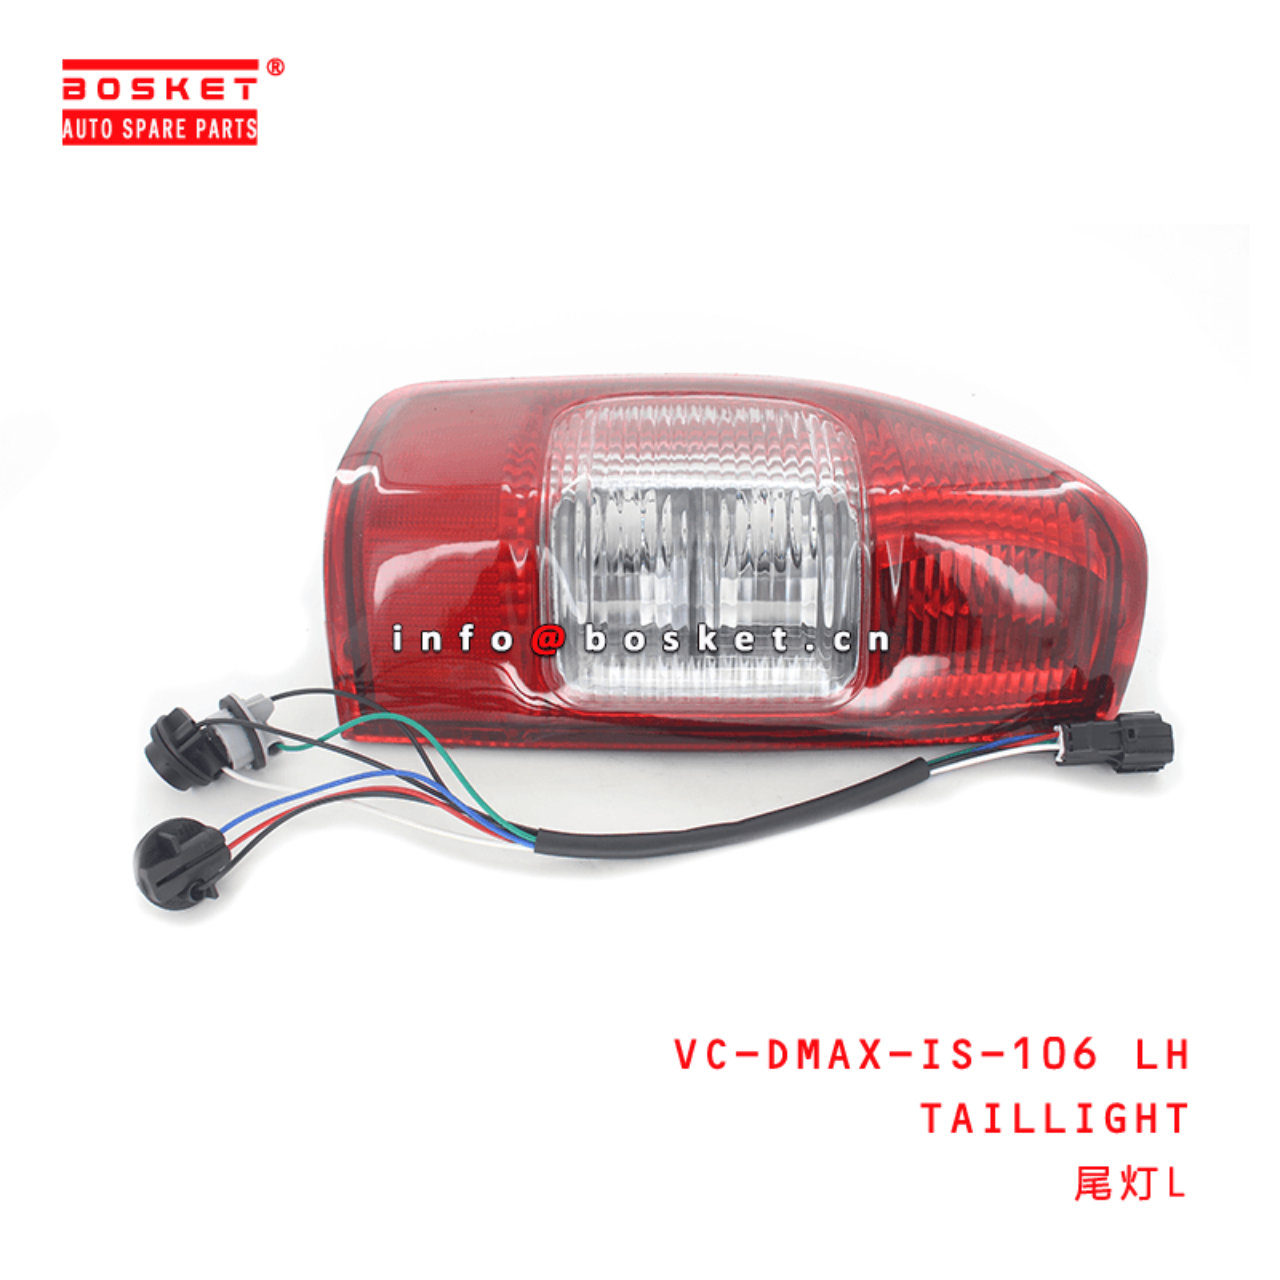  VC-DMAX-IS-106 LH Taillight Suitable for ISUZU D-MAX 02-05 06-08